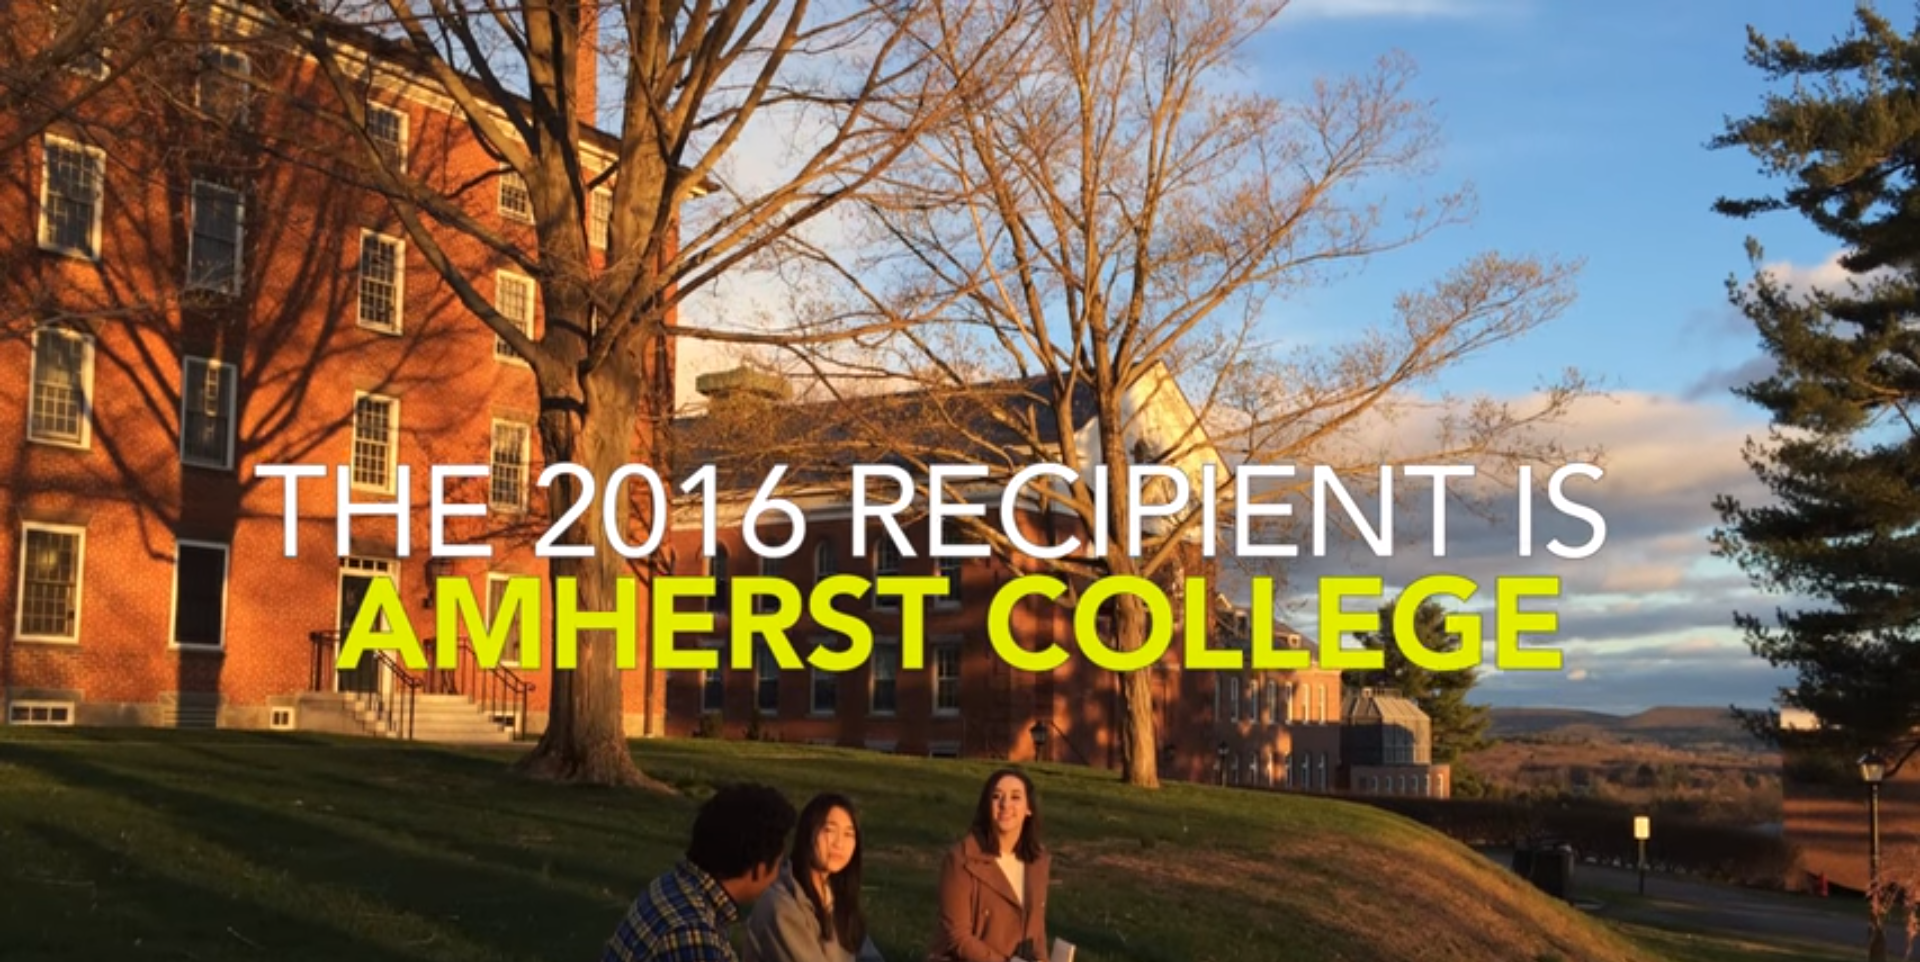 Cooke-Prize-2016-amherst-college.png